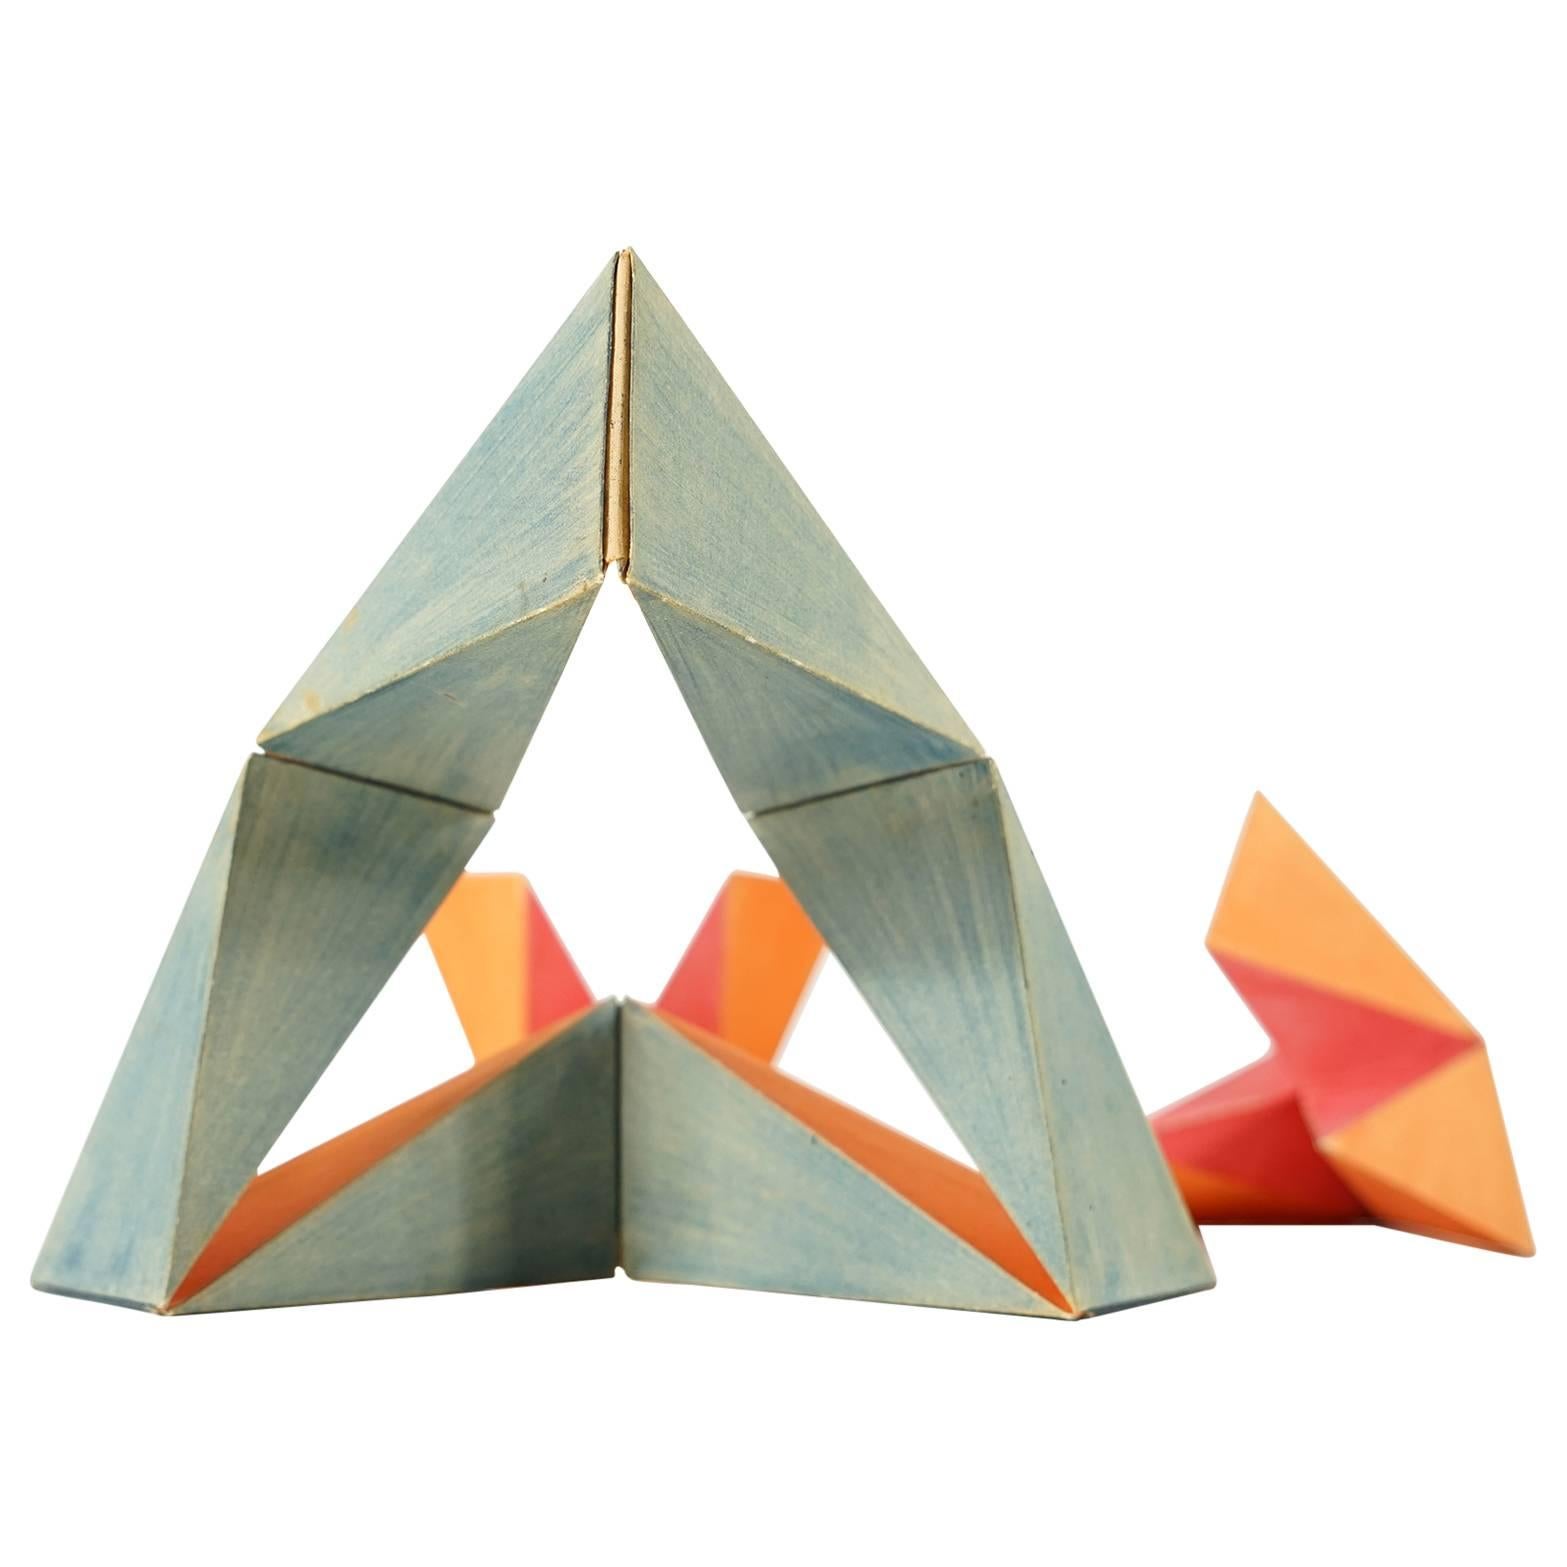 Invertible Cube Signed, Colored and Handmade by Paul Schatz, 1898-1979